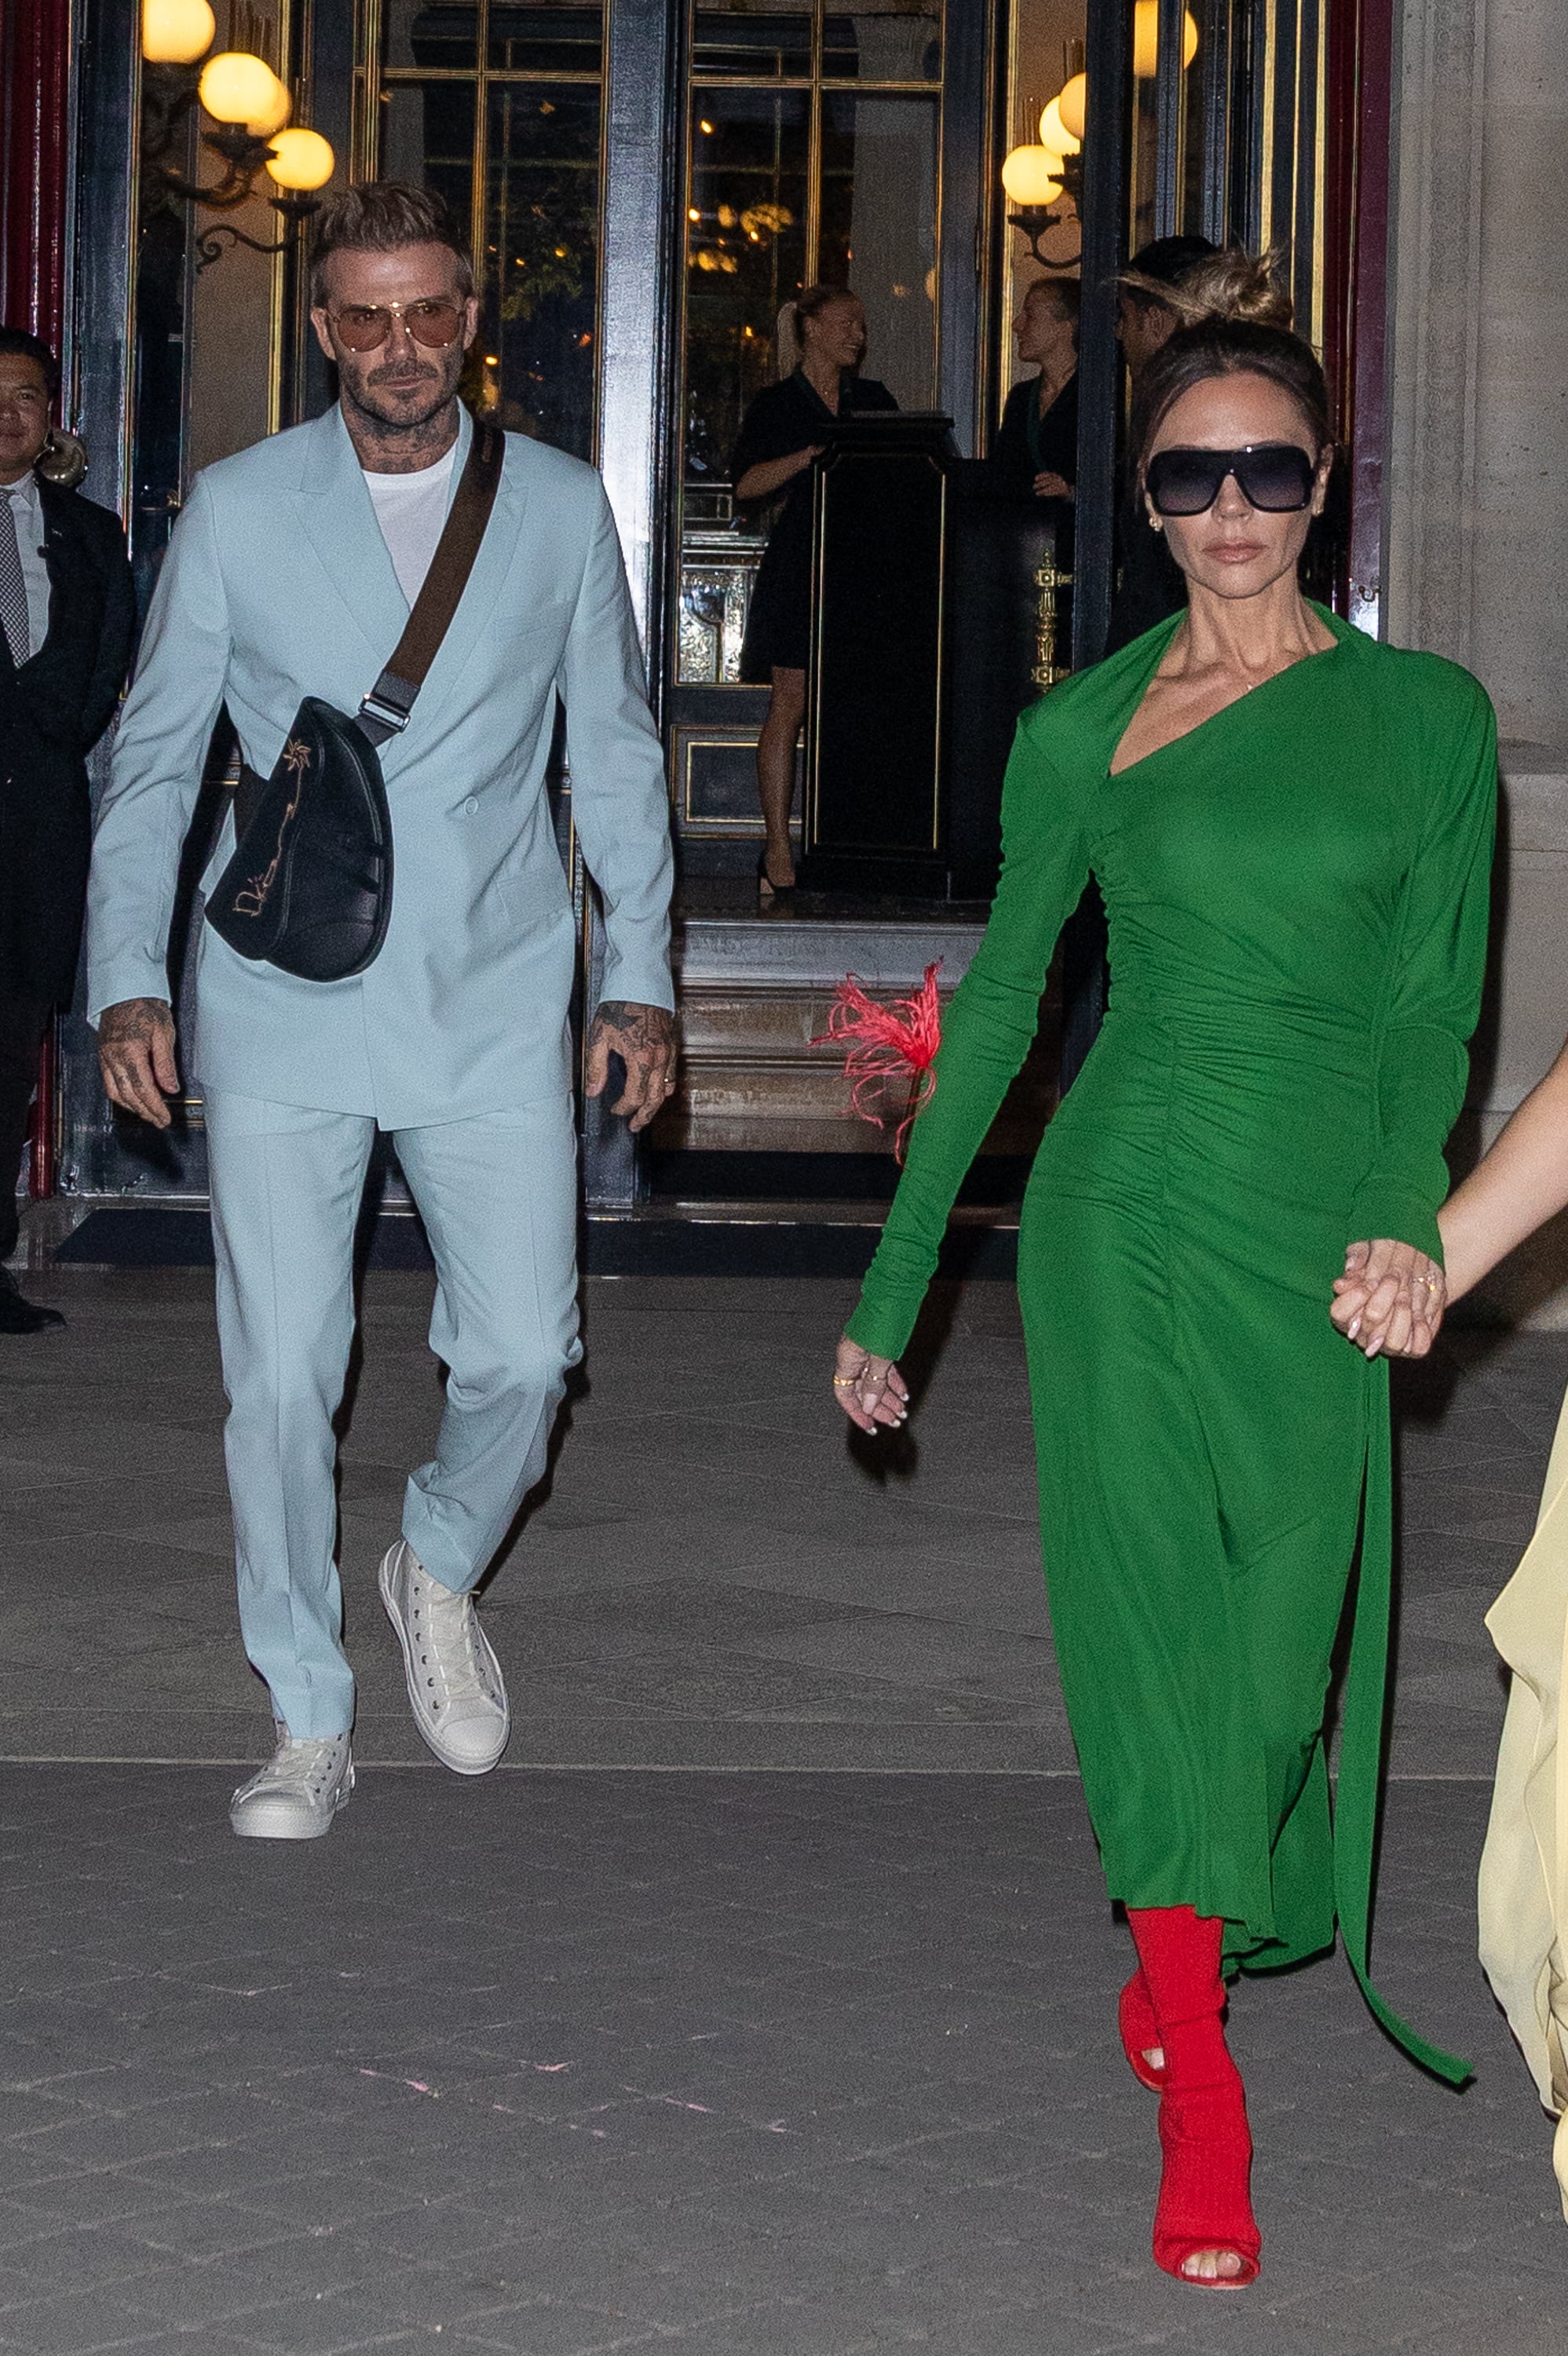 Victoria Beckham says this matching moment with David 'haunts' her